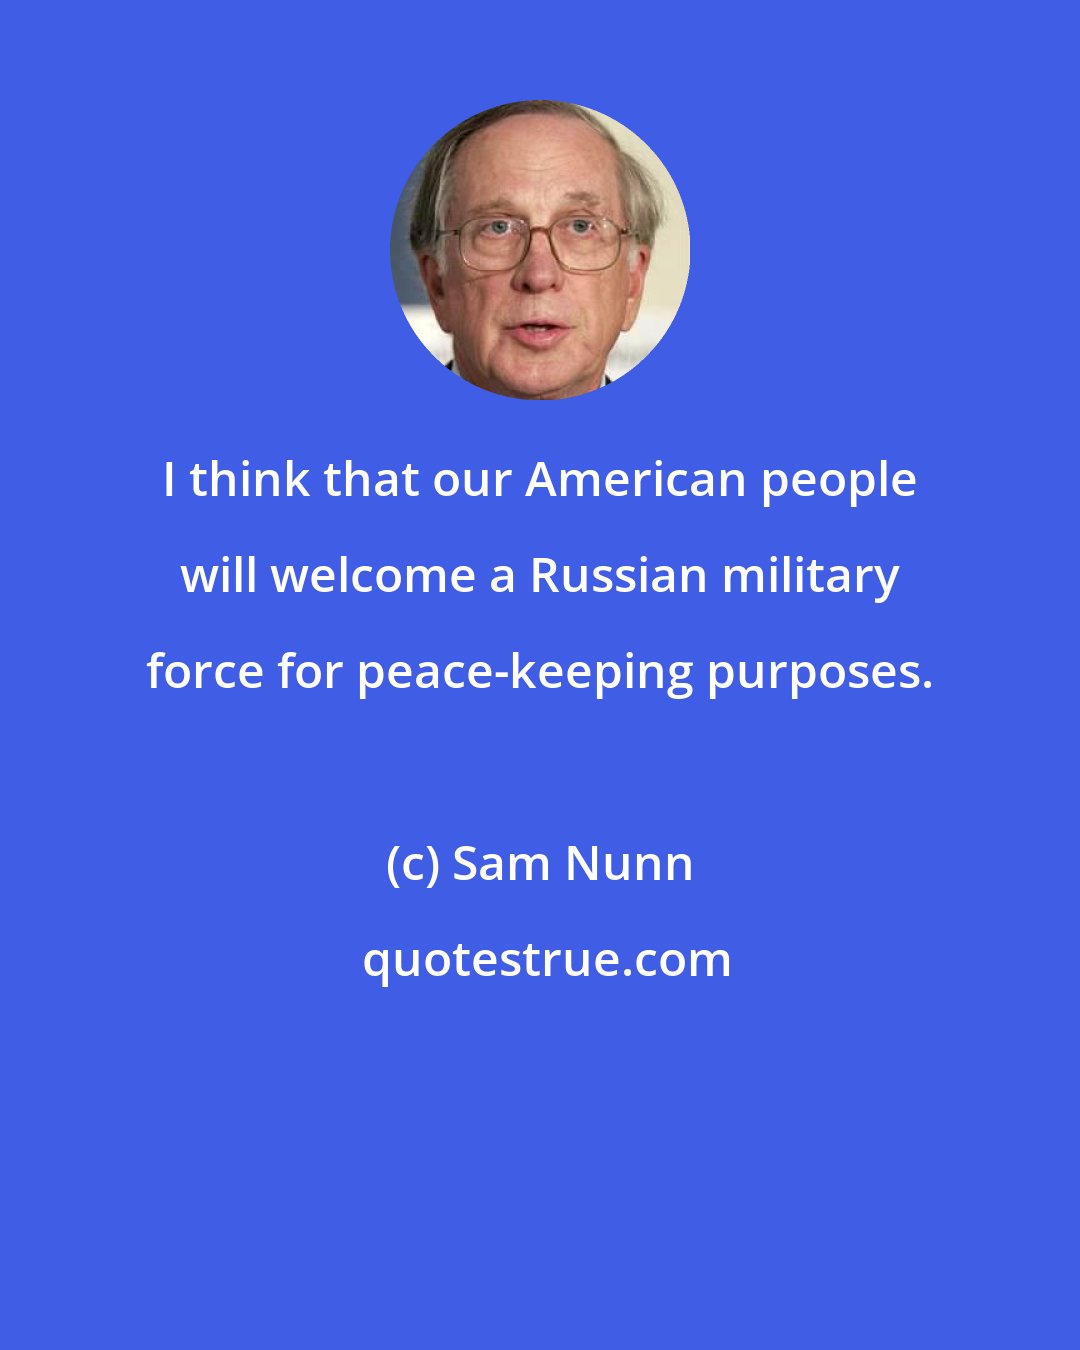 Sam Nunn: I think that our American people will welcome a Russian military force for peace-keeping purposes.